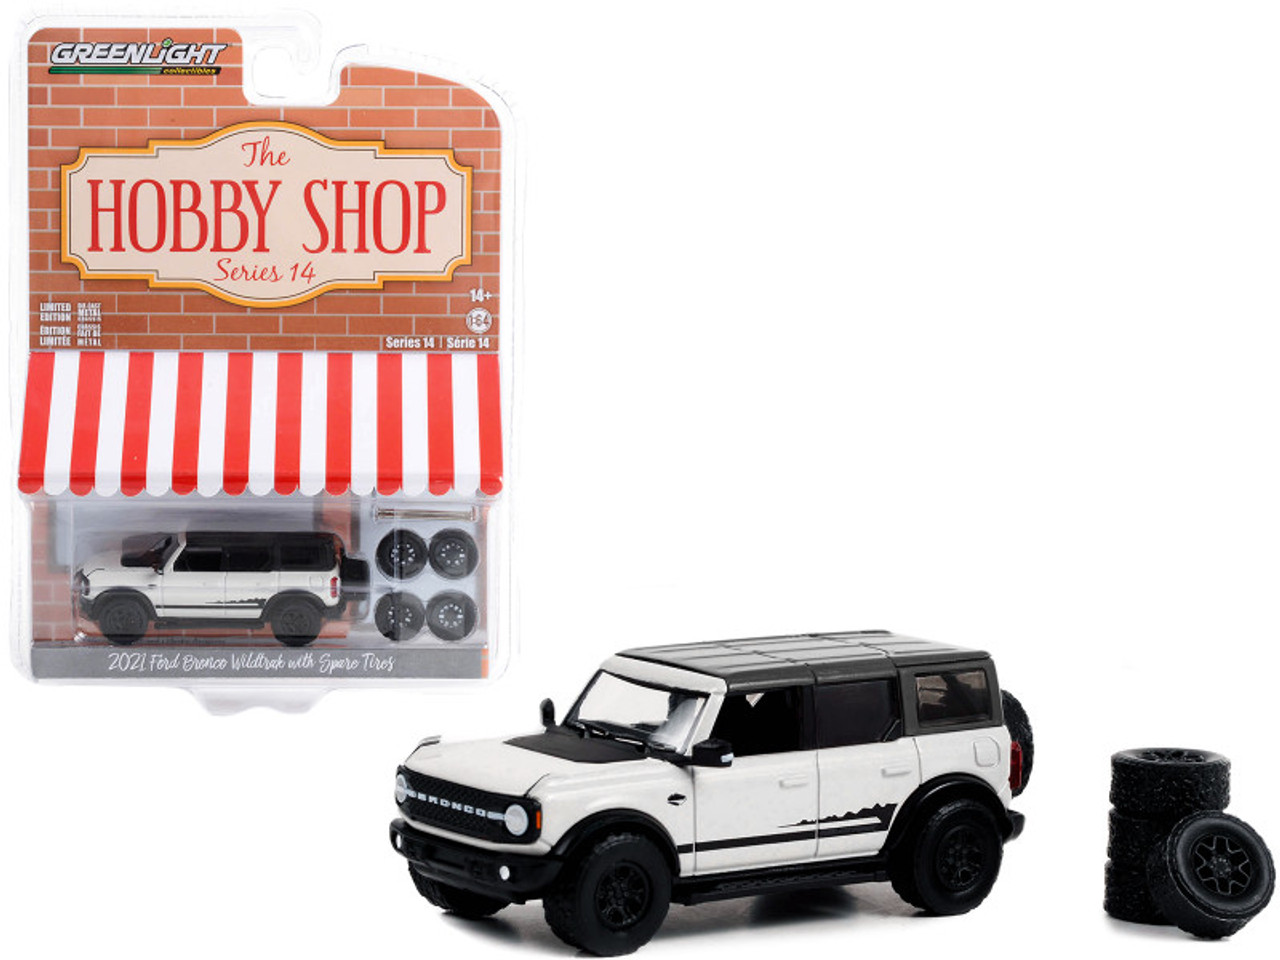 2021 Ford Bronco Wildtrak White with Black Top and Stripes and Spare Tires "The Hobby Shop" Series 14 1/64 Diecast Model Car by Greenlight